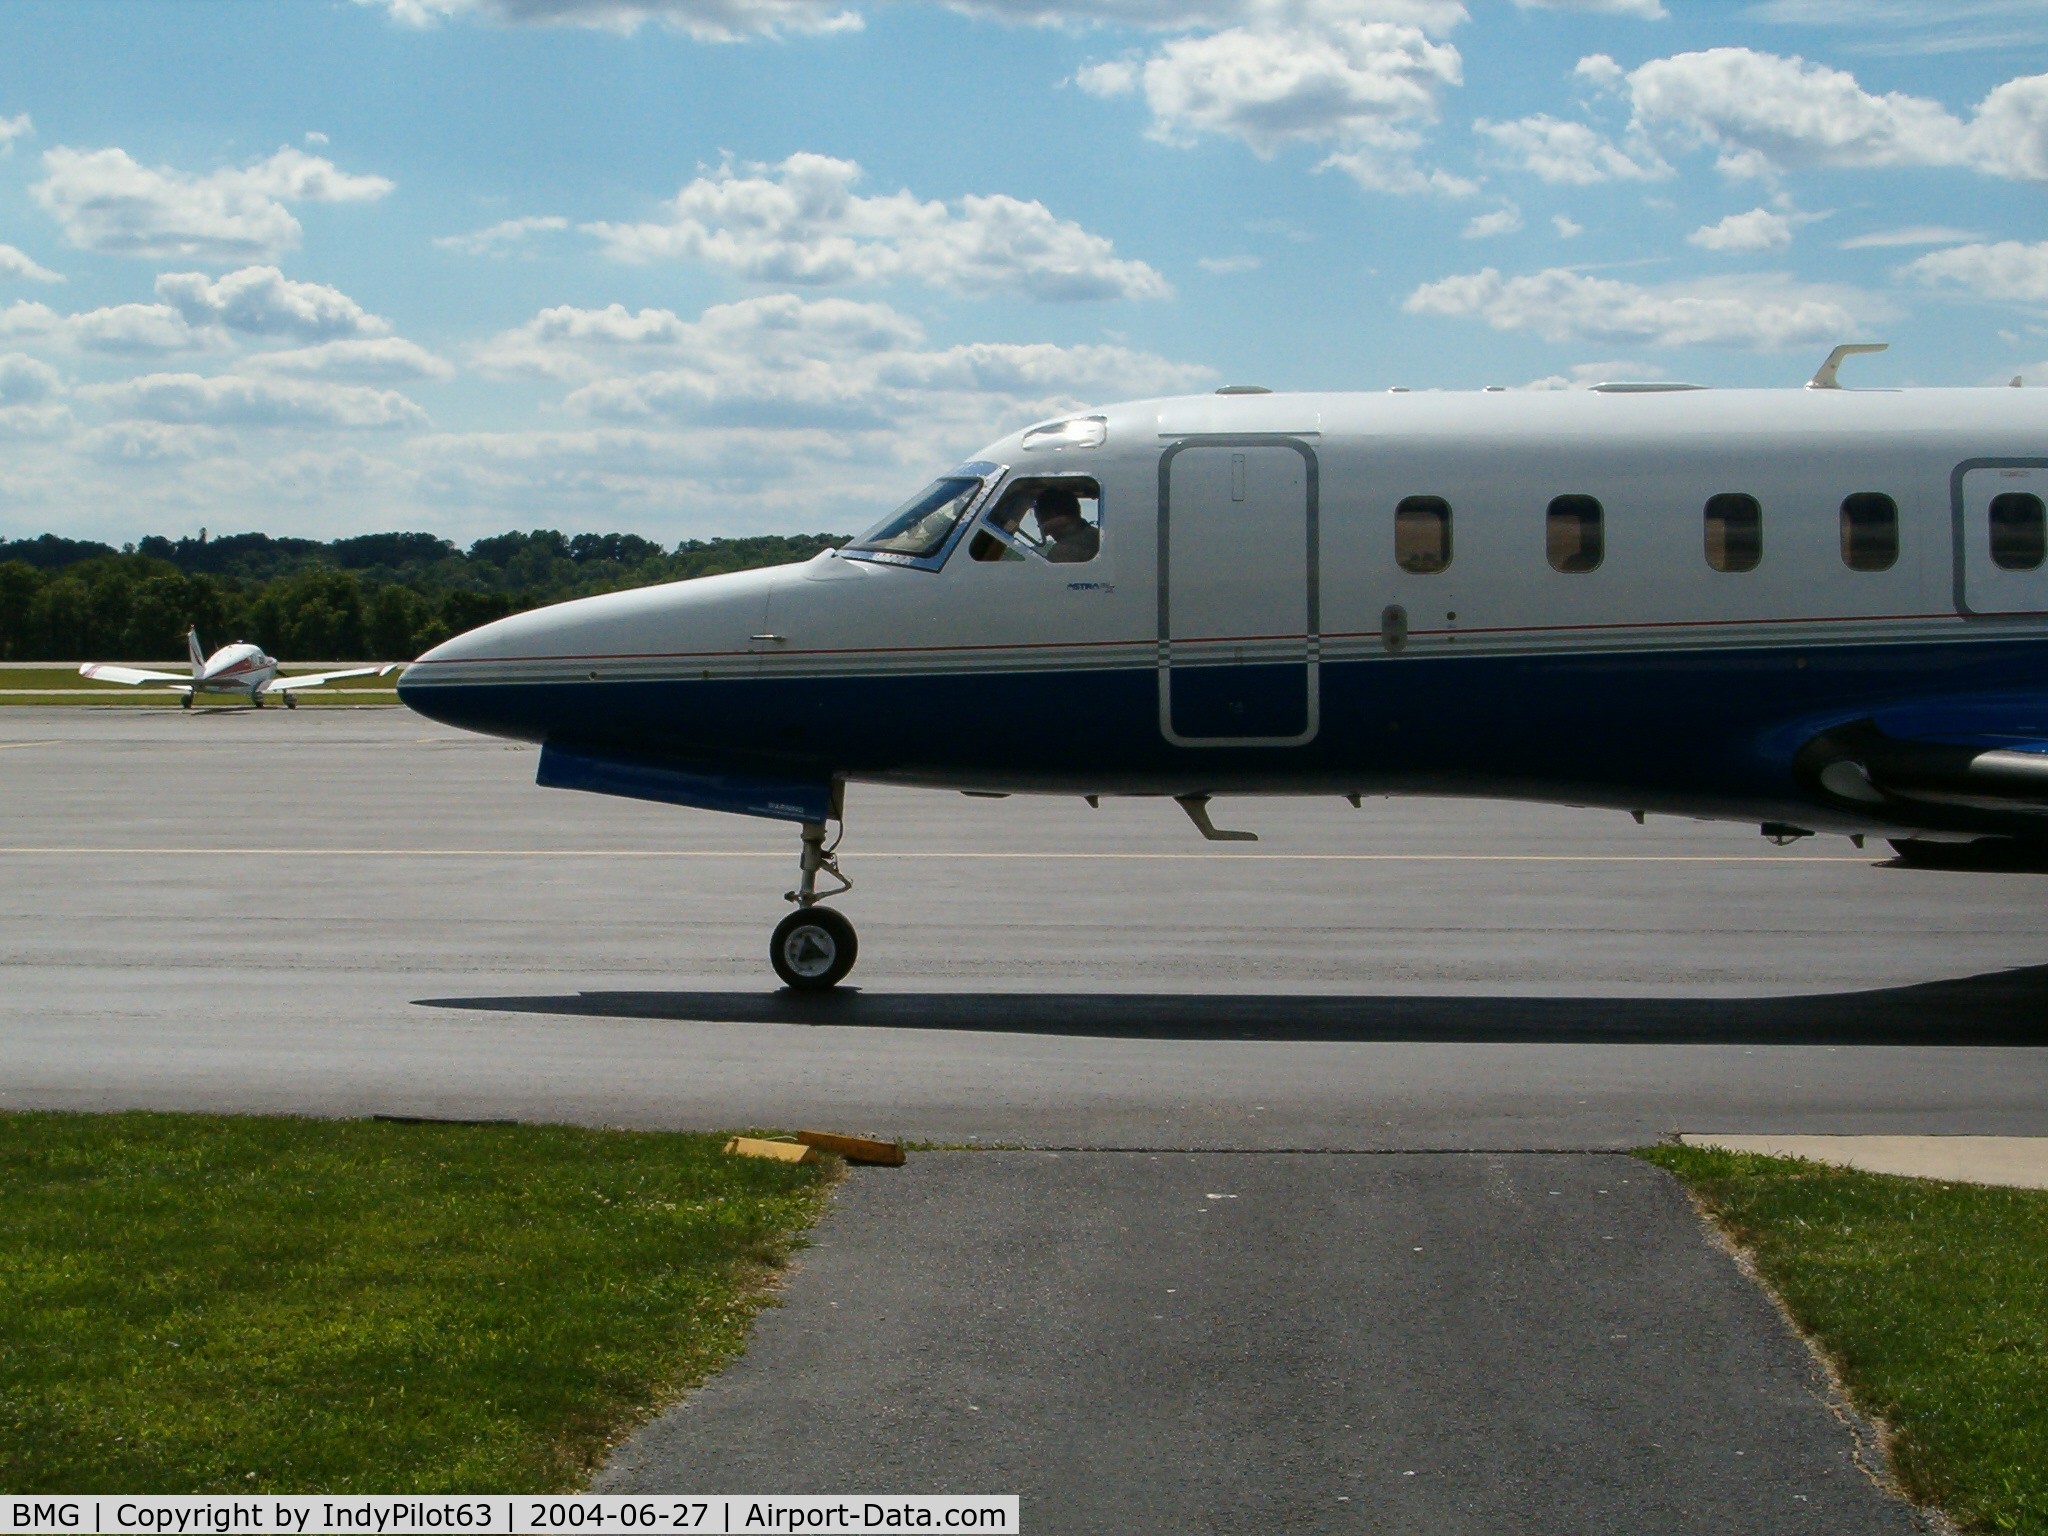 Monroe County Airport (BMG) - A private jet on the tarmac